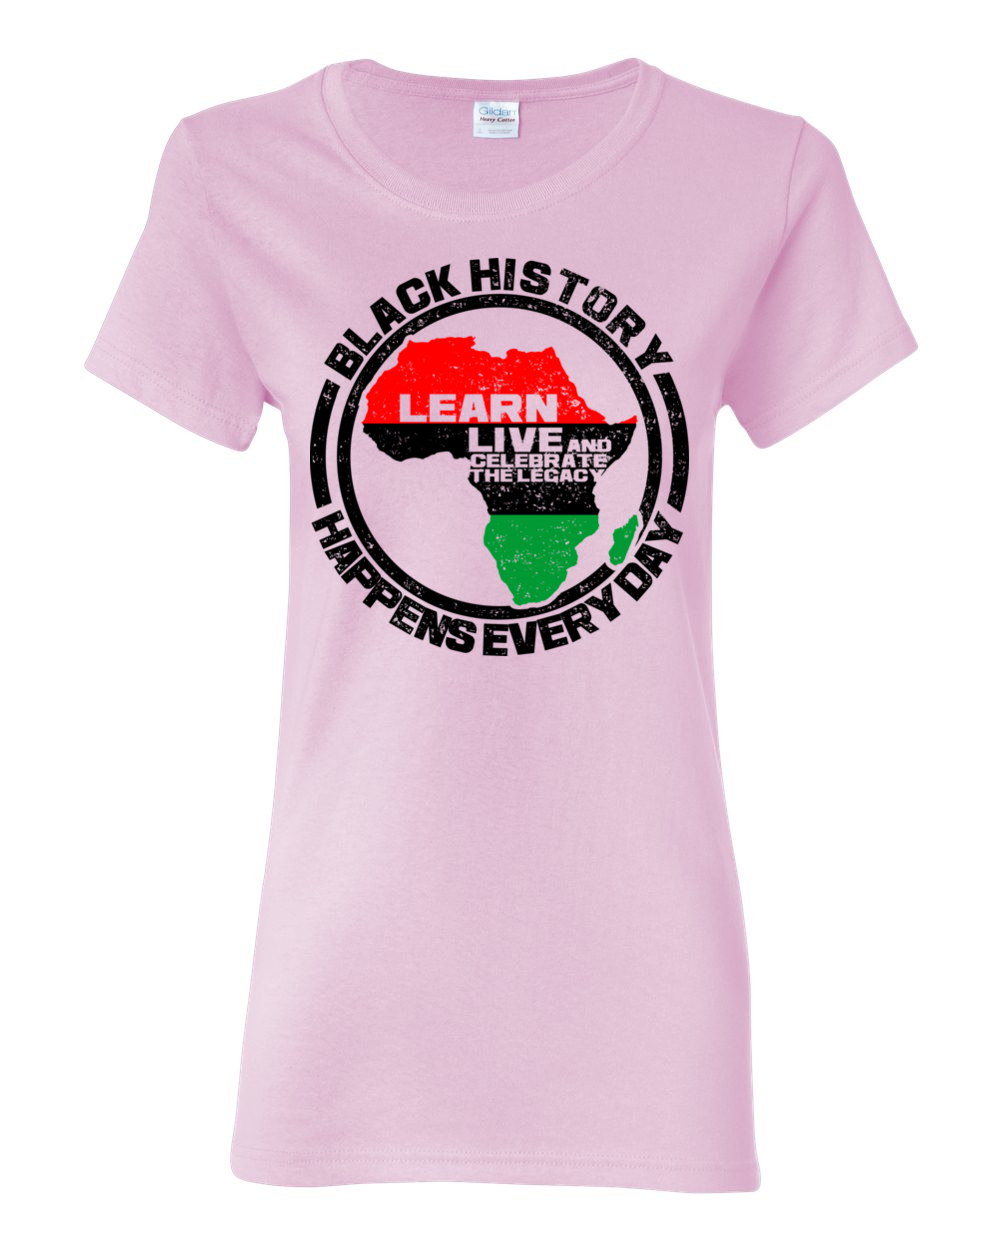 Black History Happens Everyday Women's T-Shirt by RBG Forever (Pink)